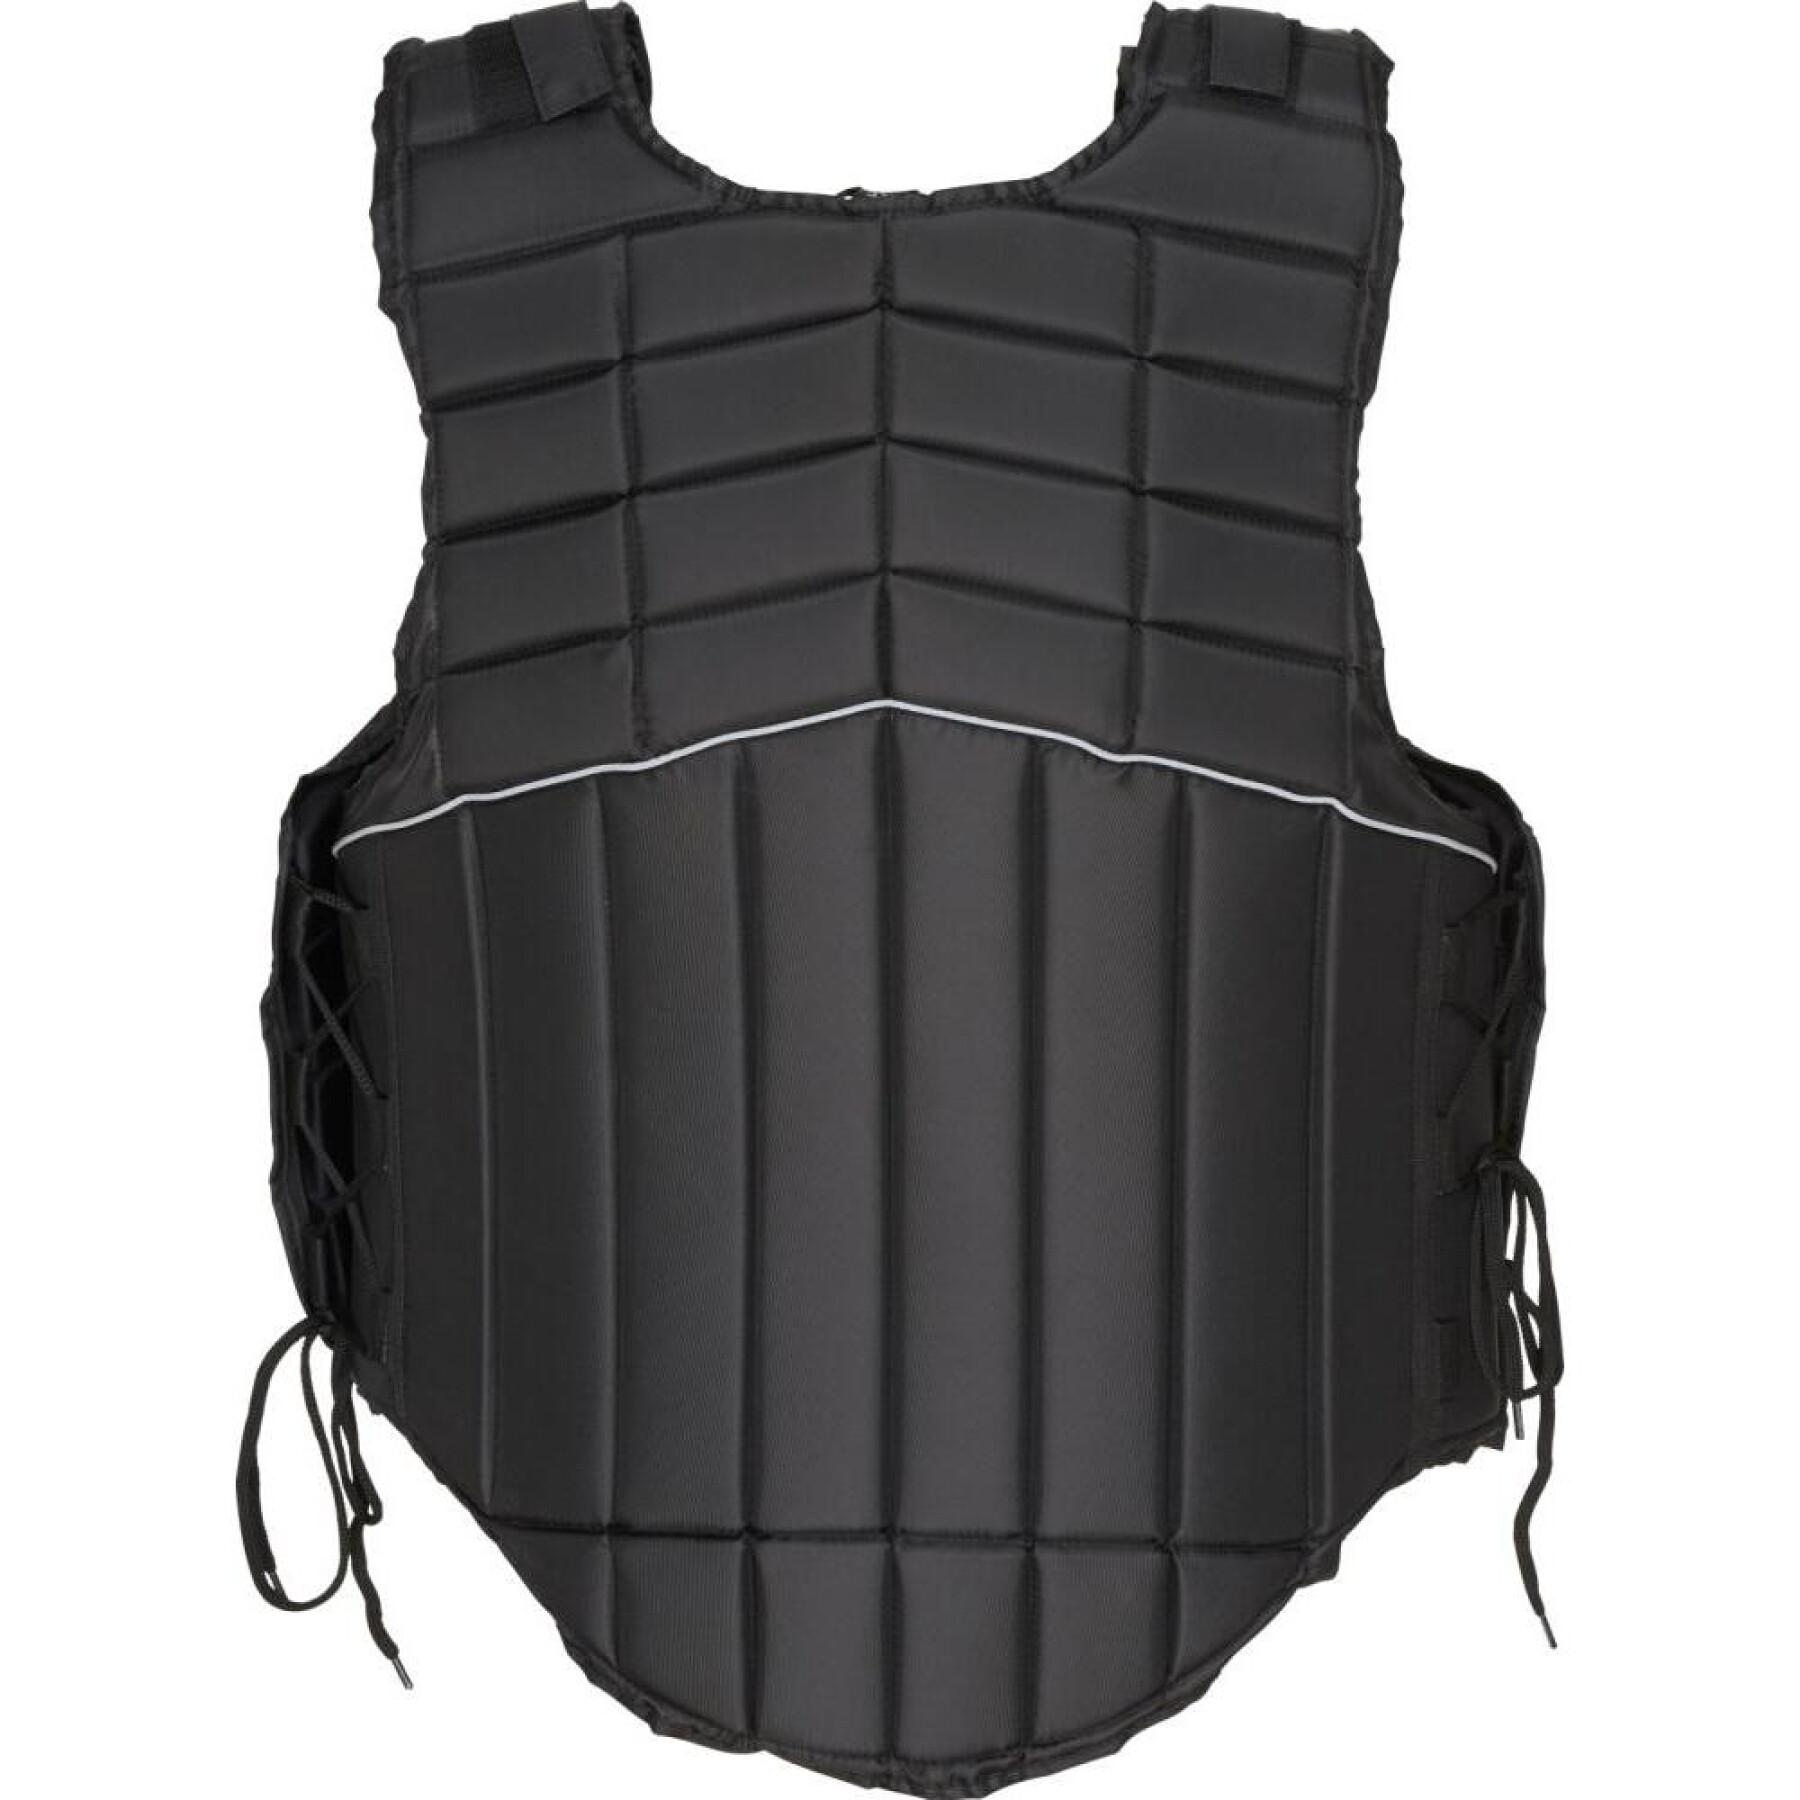 Child riding protection vest Equipage Rider